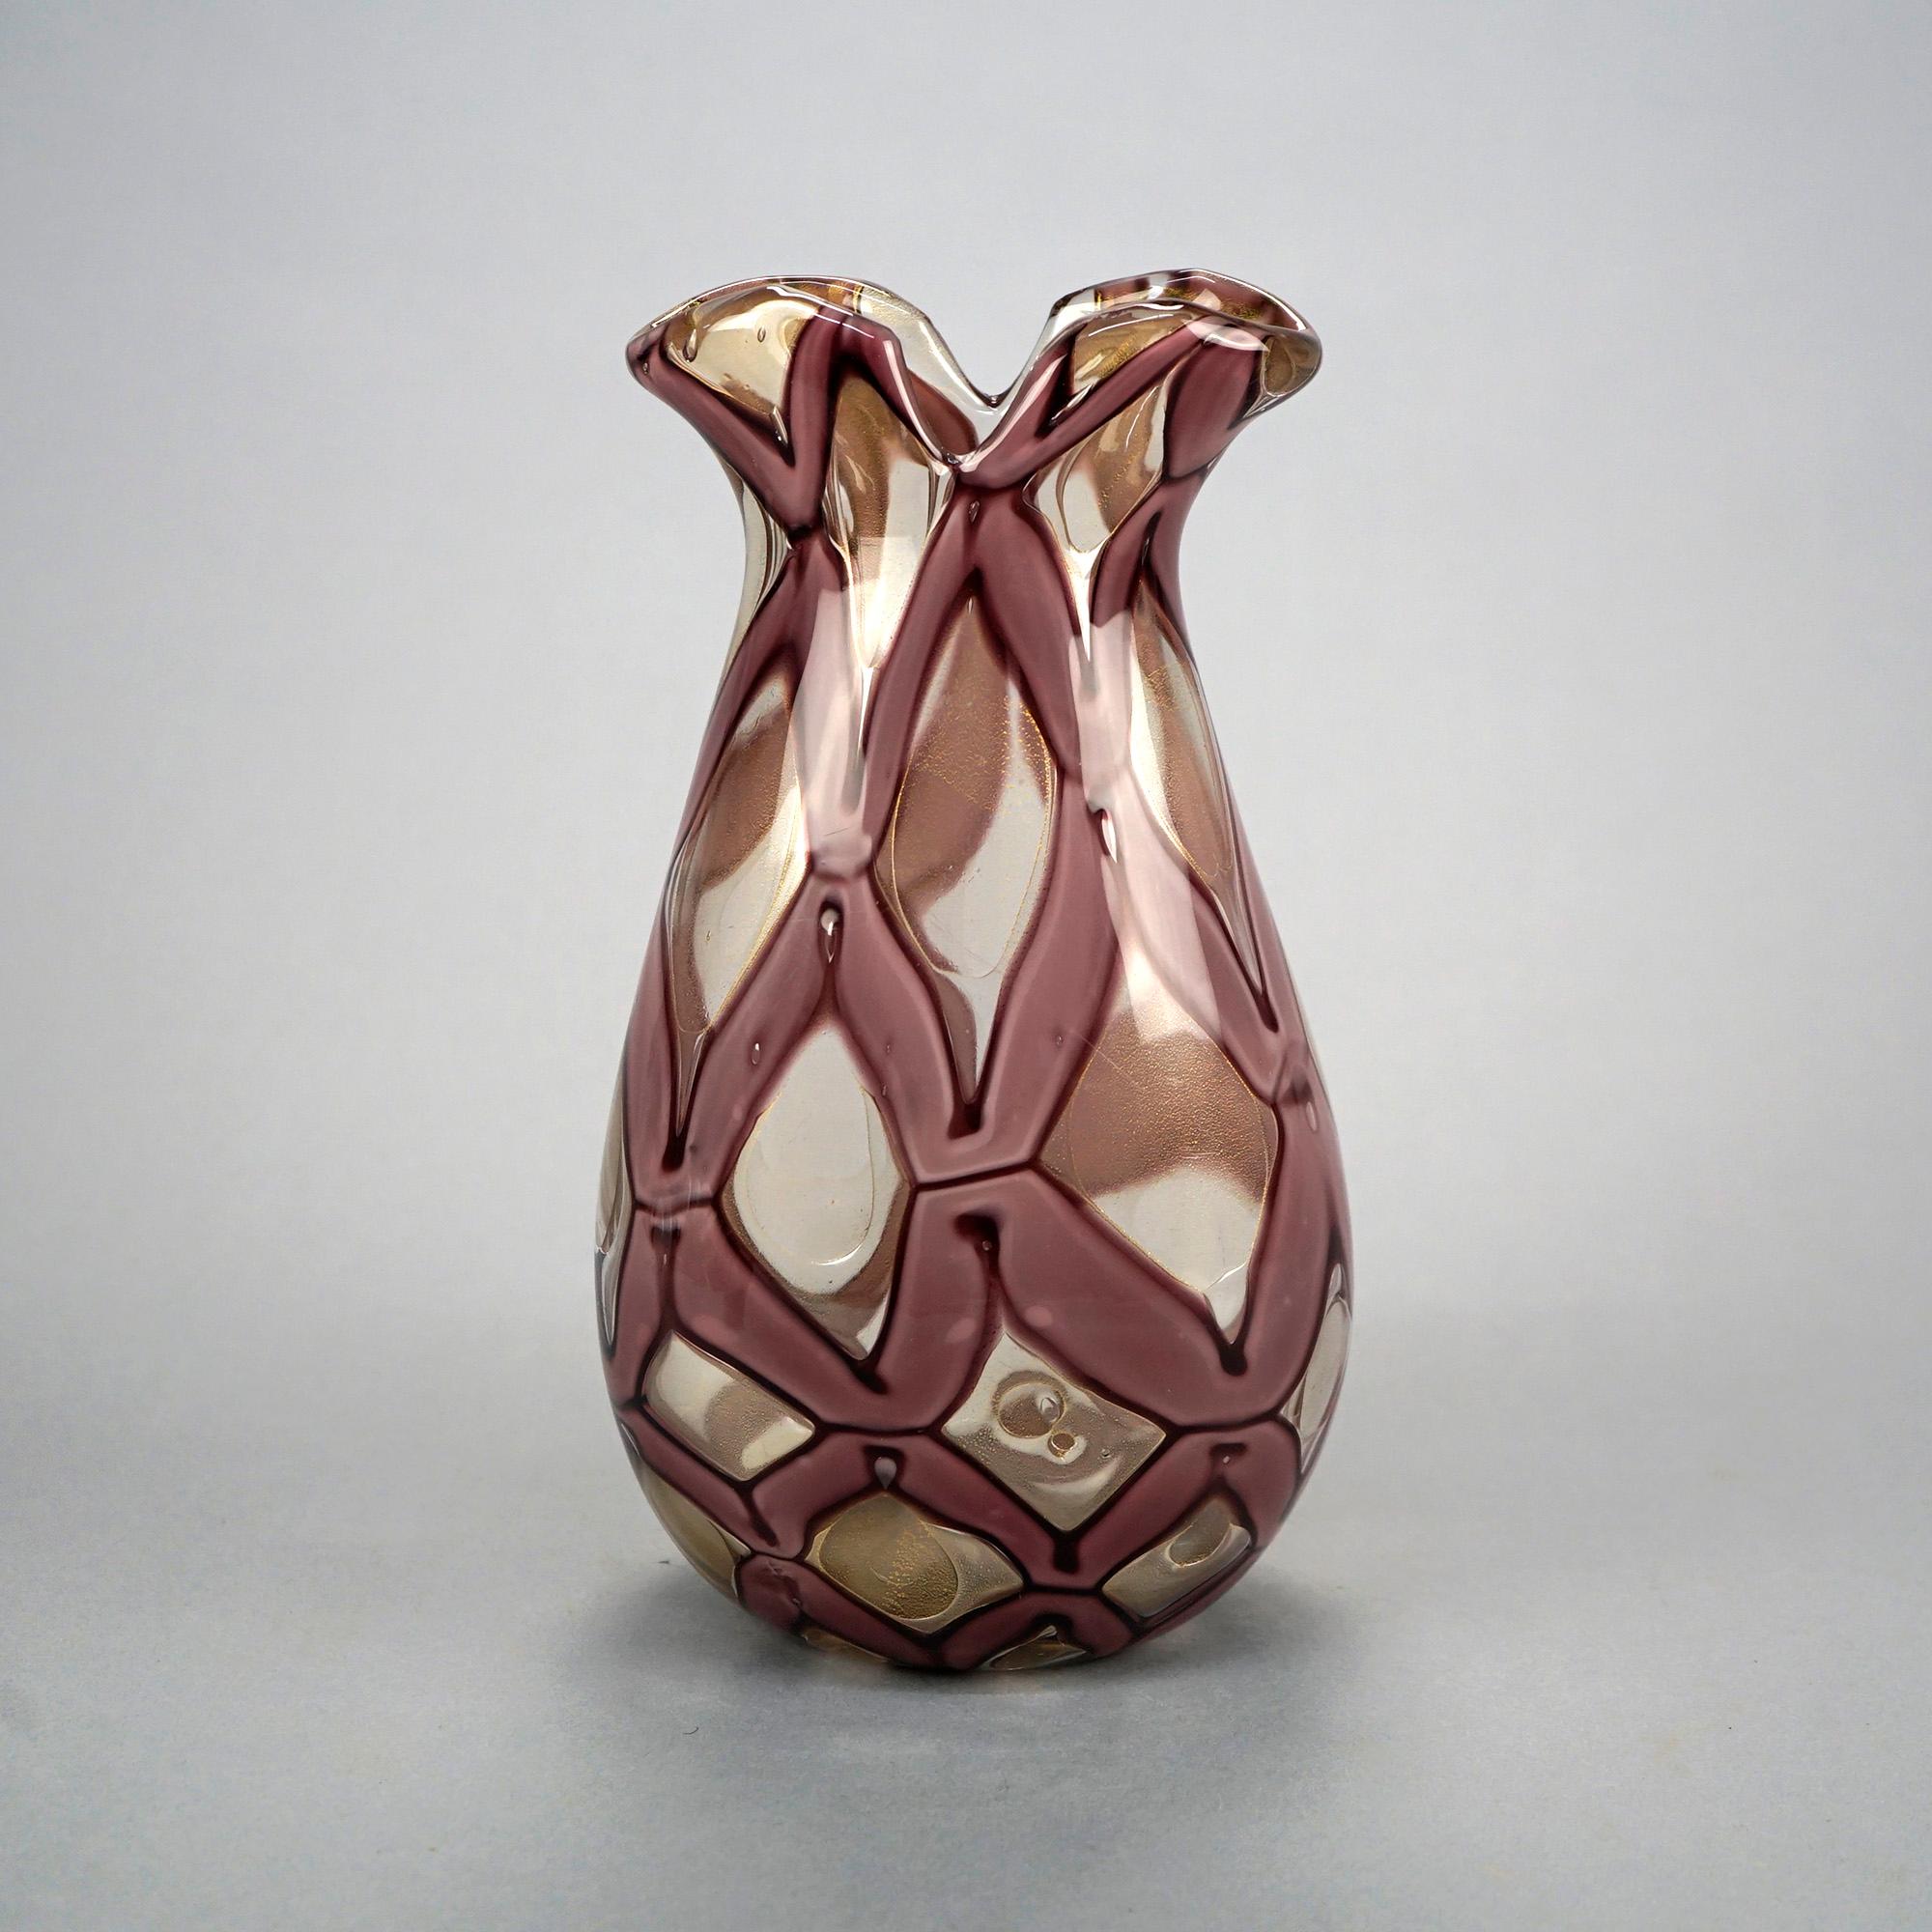 A Mid-Century Modern vase in the manner of Venetian Murano offers mouth blown stylized ribbon art glass construction with ruffled rim and lattice design, 20th C

Measures- 10.5'' H x 5.75'' W x 4.25'' D.